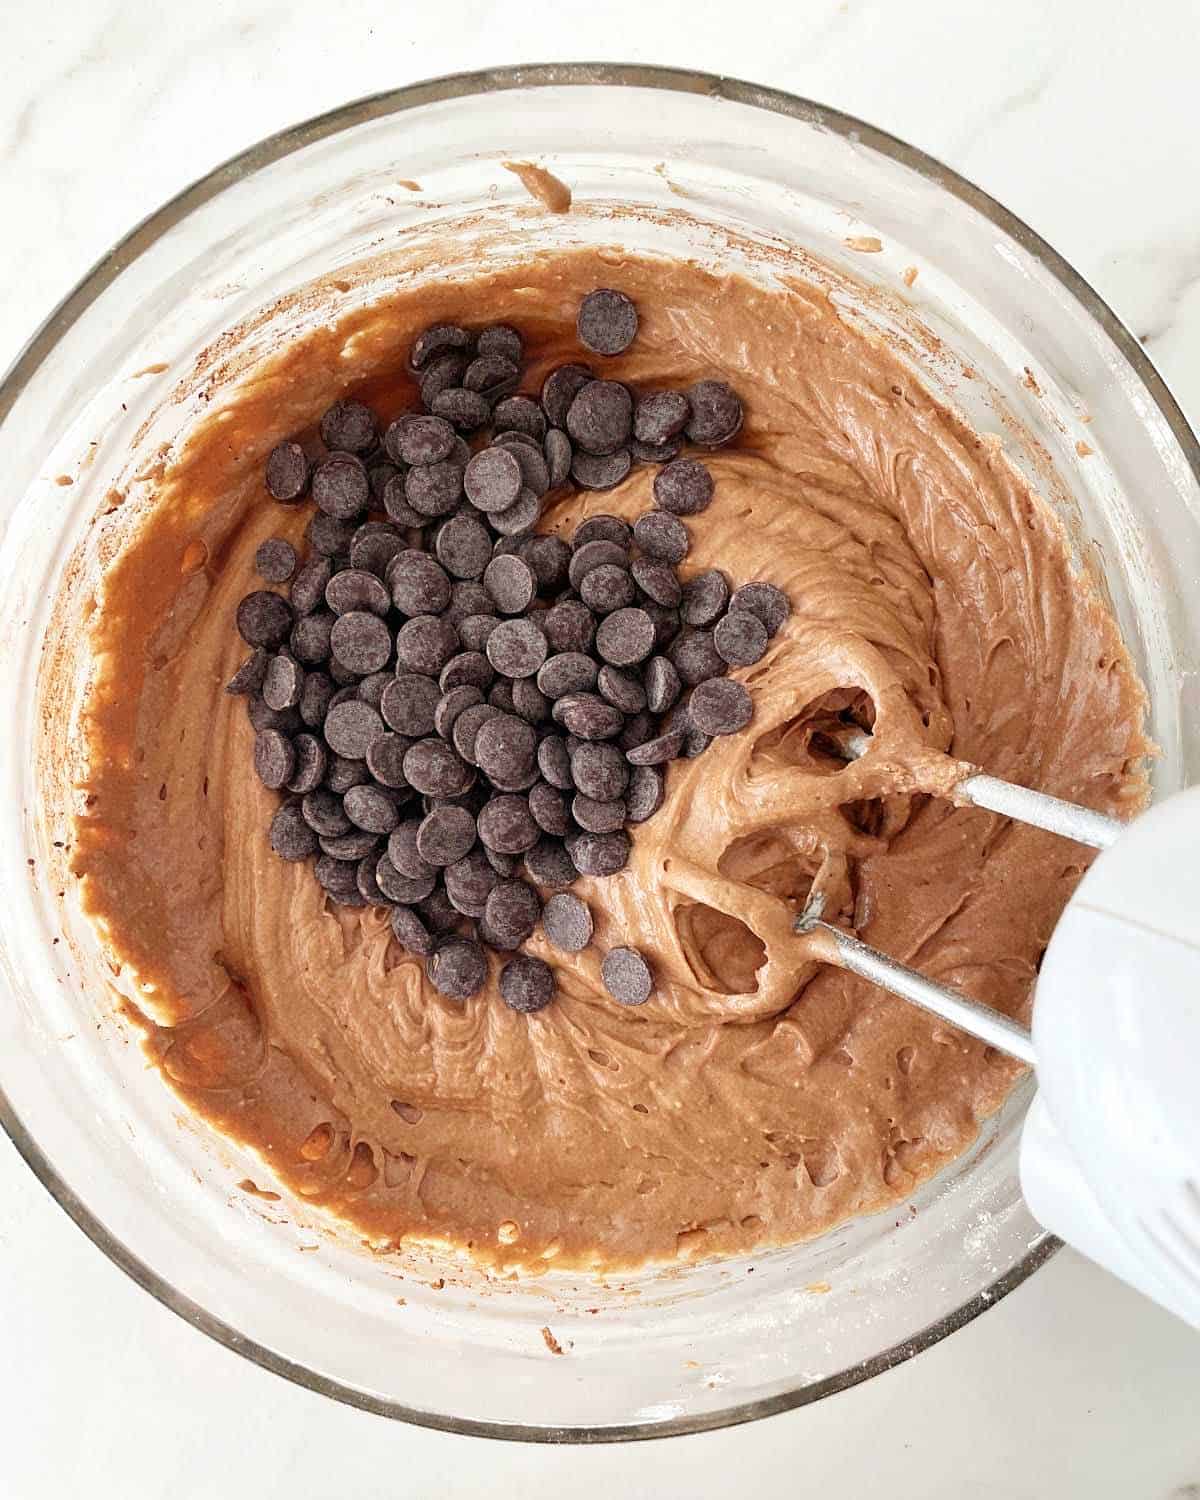 Chocolate chips added to chocolate cake batter in a glass bowl with an electric mixer inside. White marble surface.